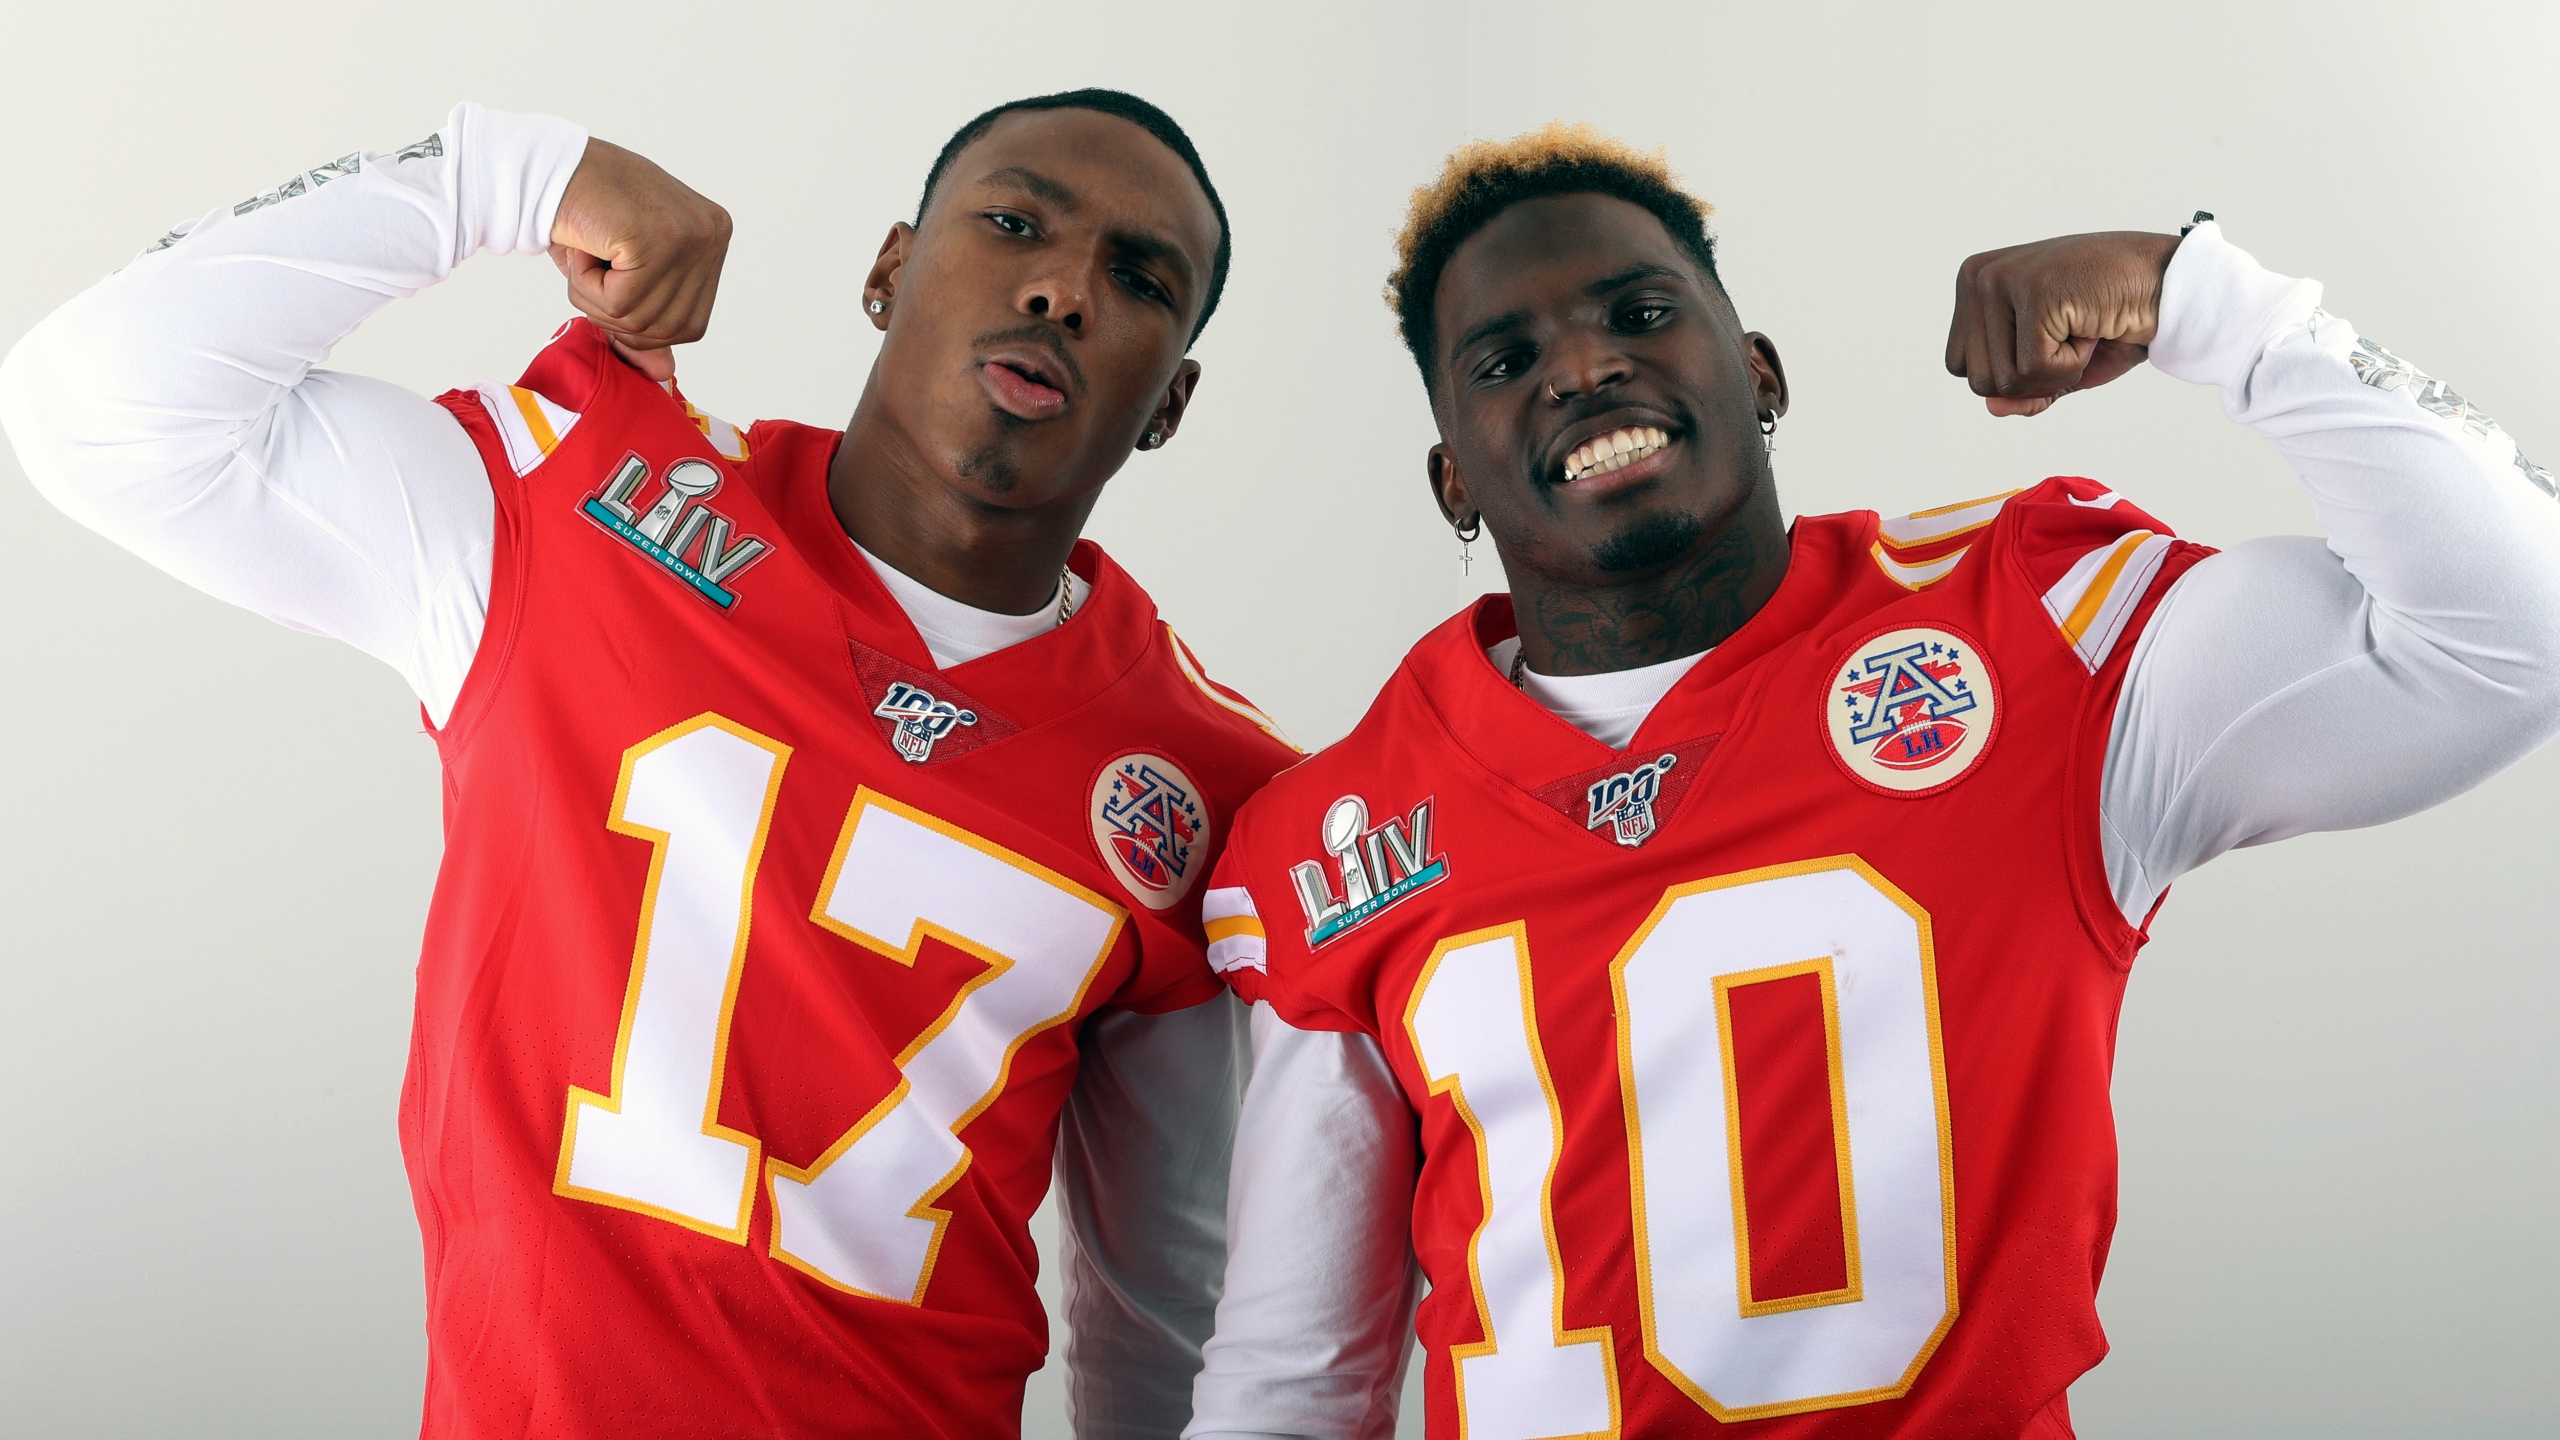 Chiefs wide receivers showcase speed during indoor race